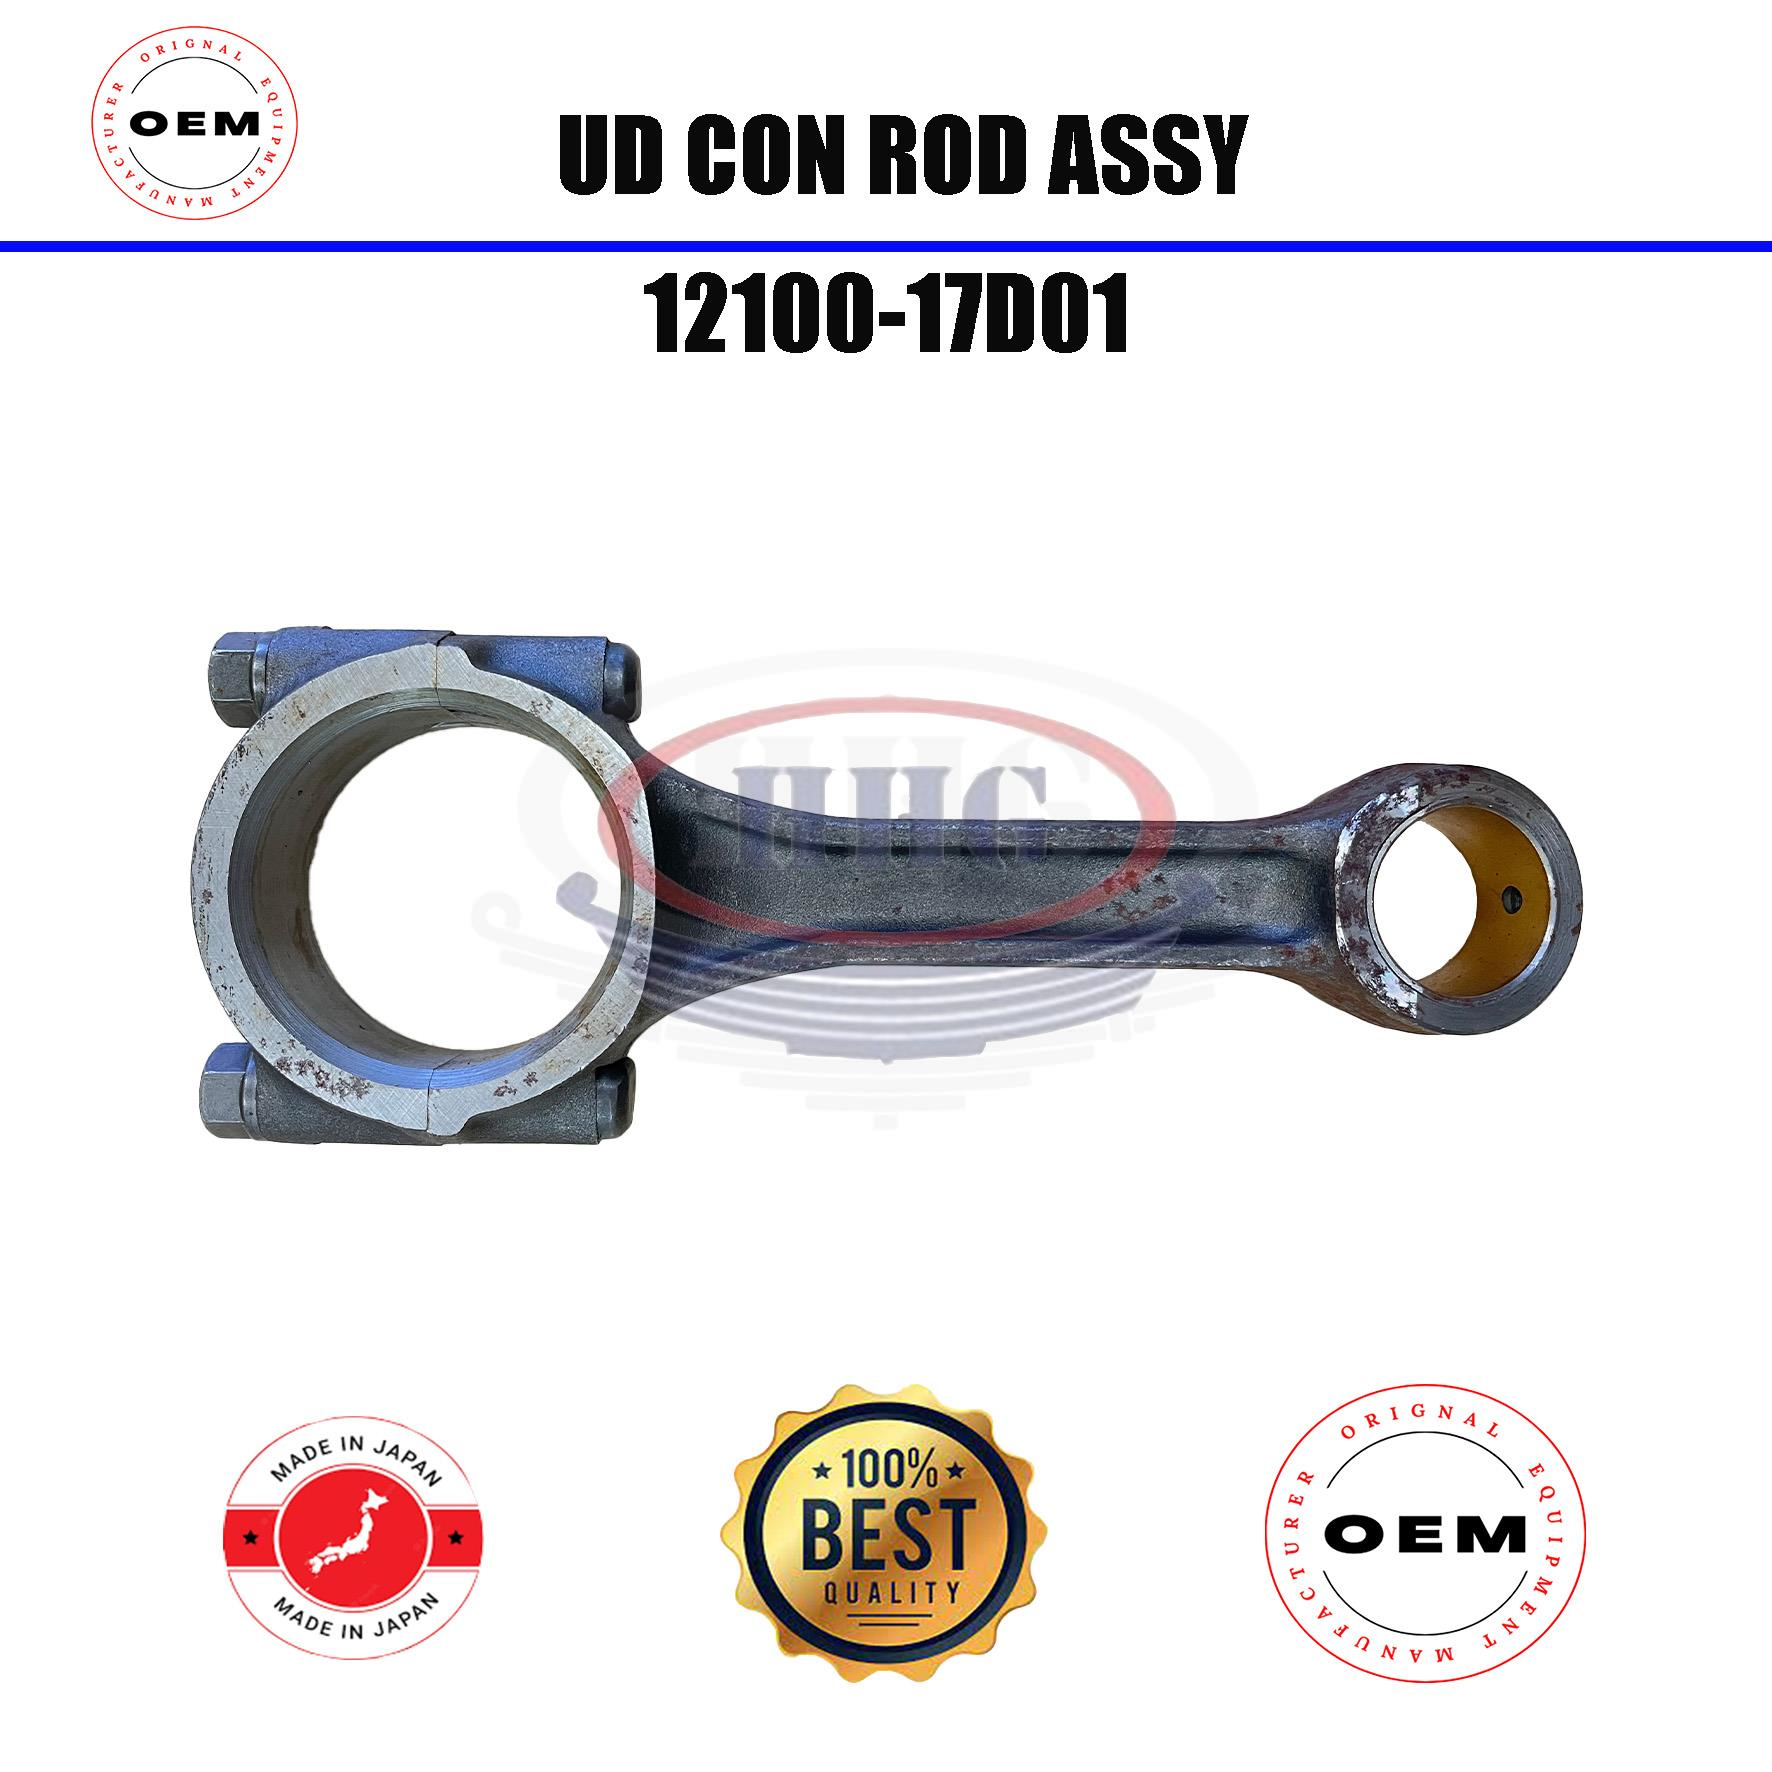 OEM UD FE6T 24V Con Rod Assy (12100-17D01)